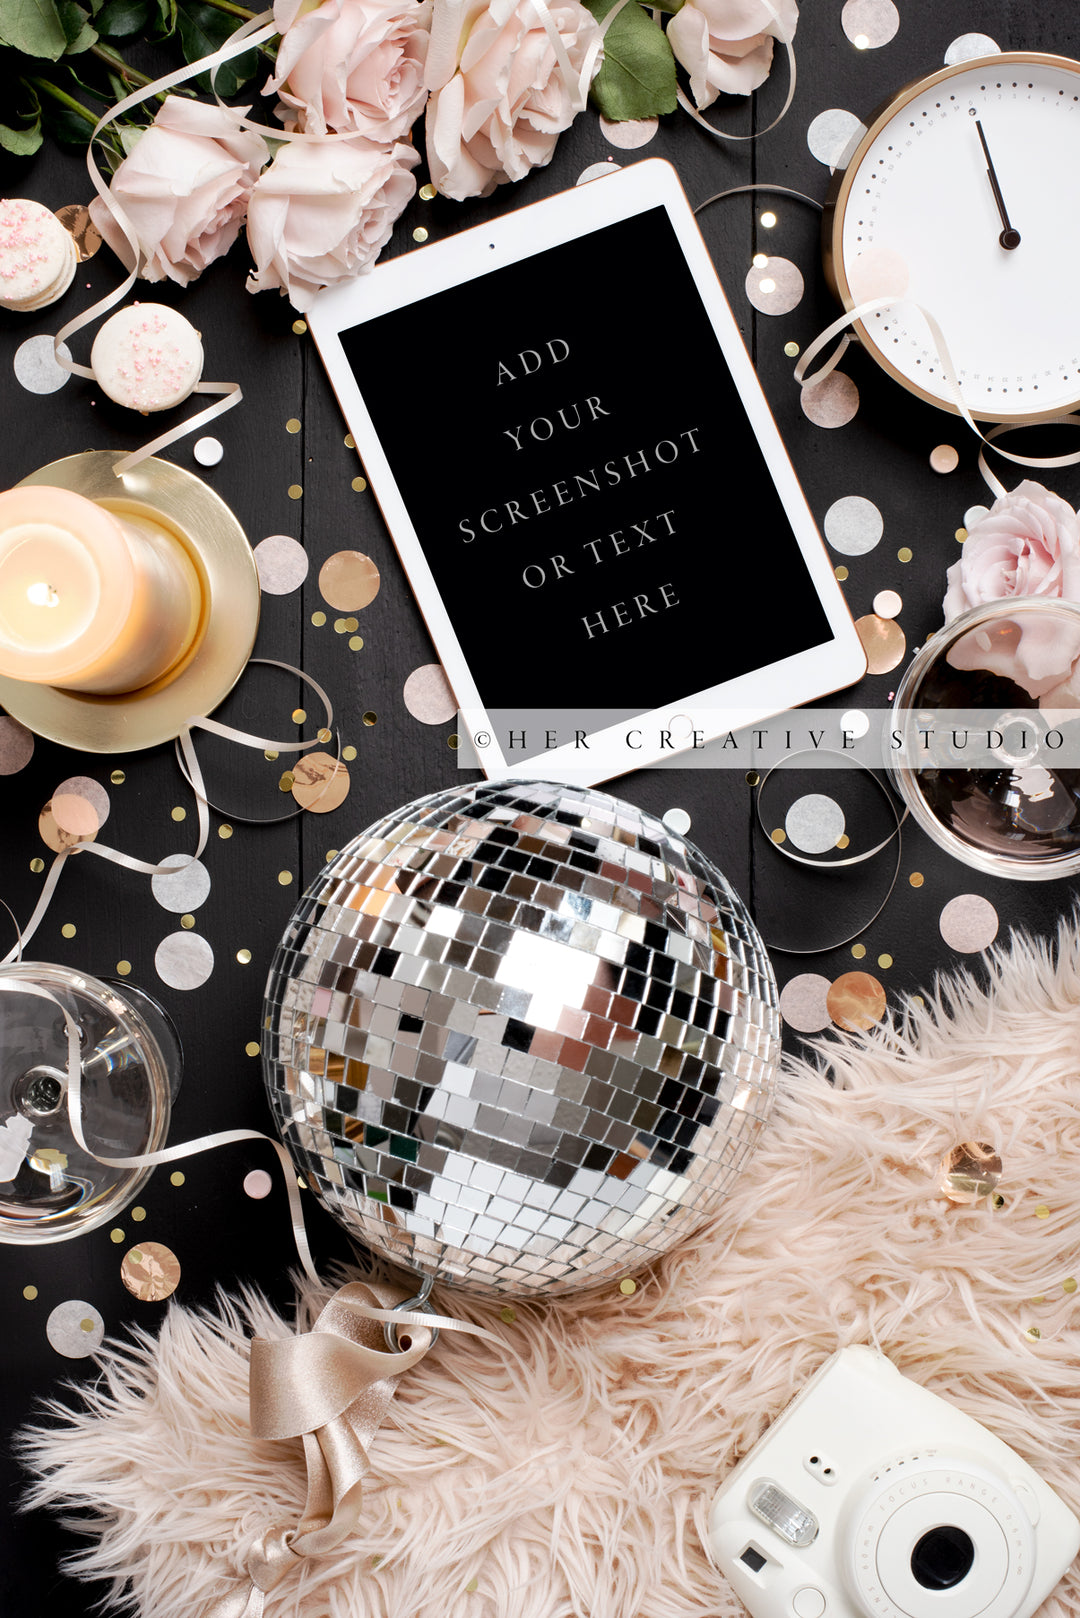 Disco Ball, Clock & Tablet, New Year's Eve Stock Image